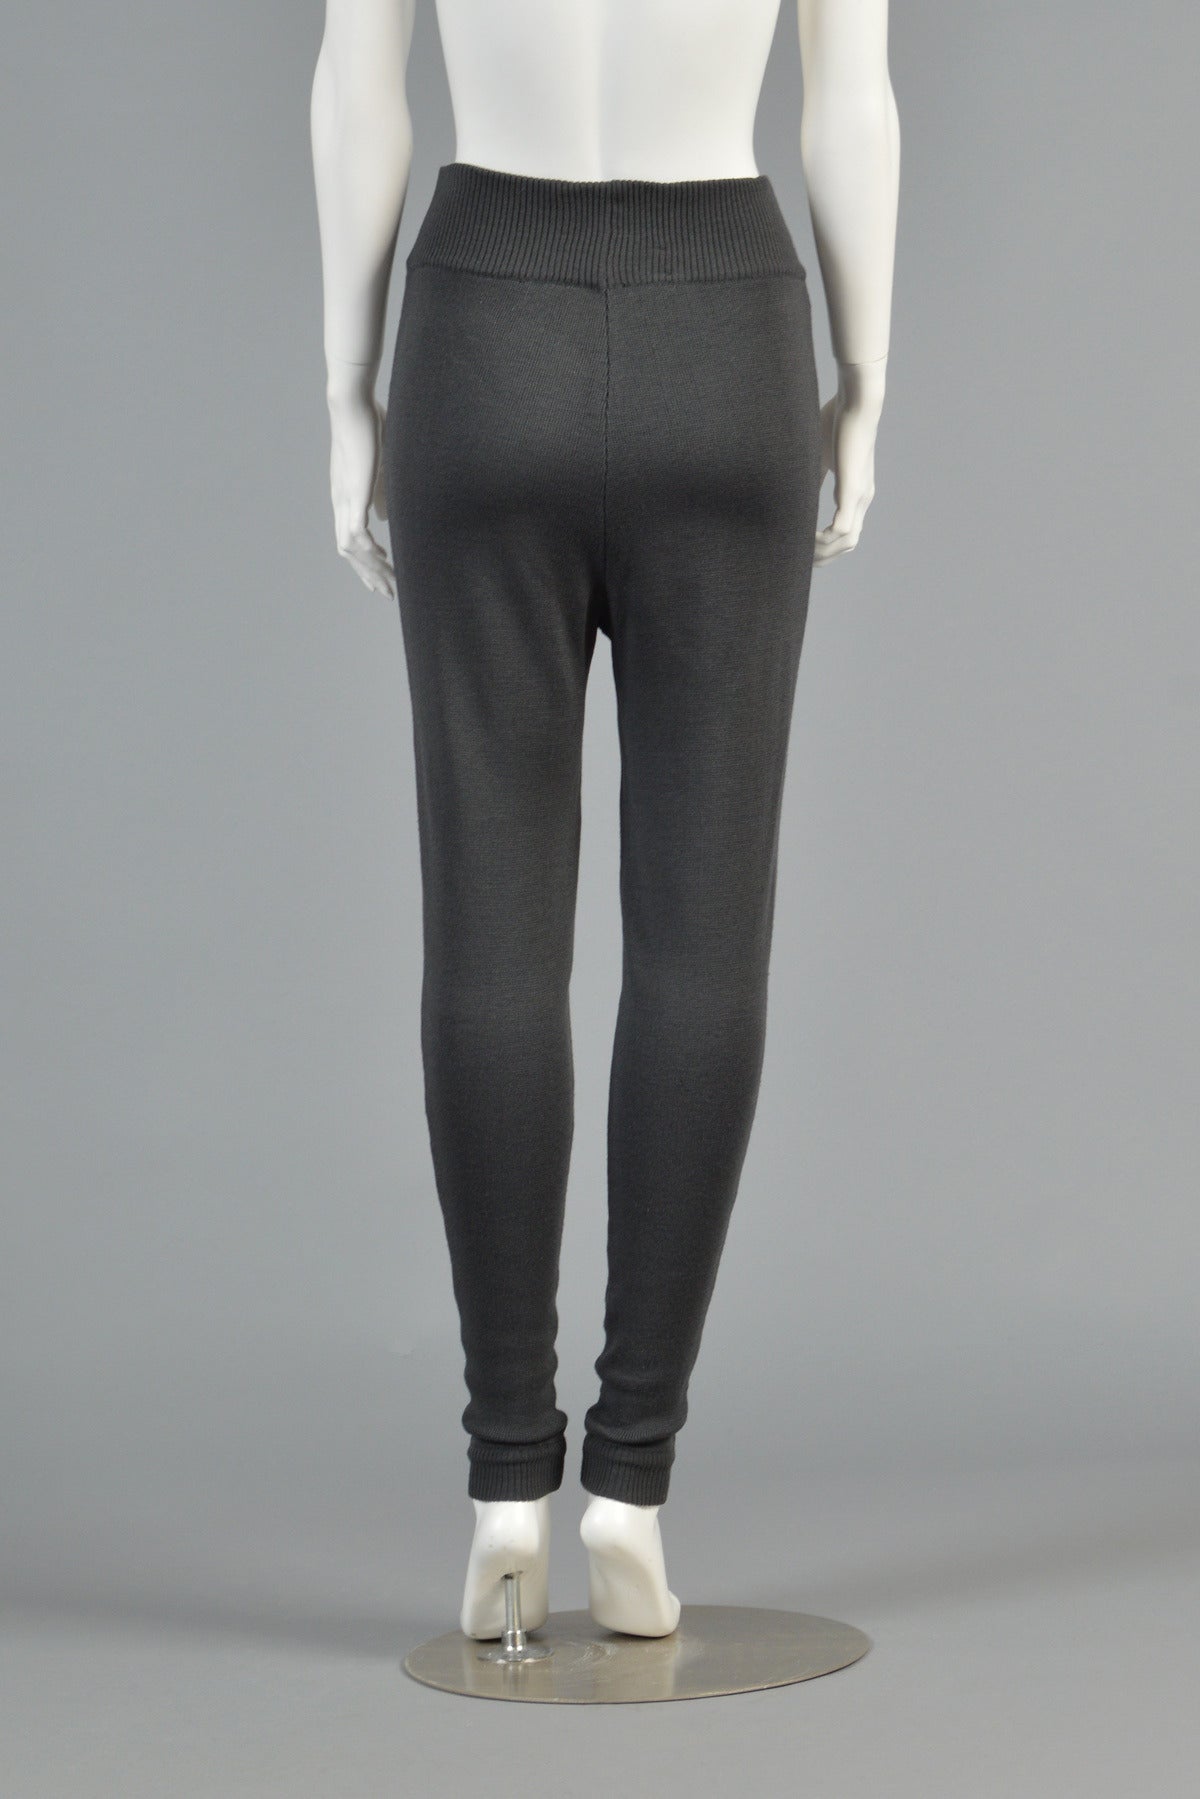 Claude Montana High Waisted Knit Wool Legging Pants For Sale 1